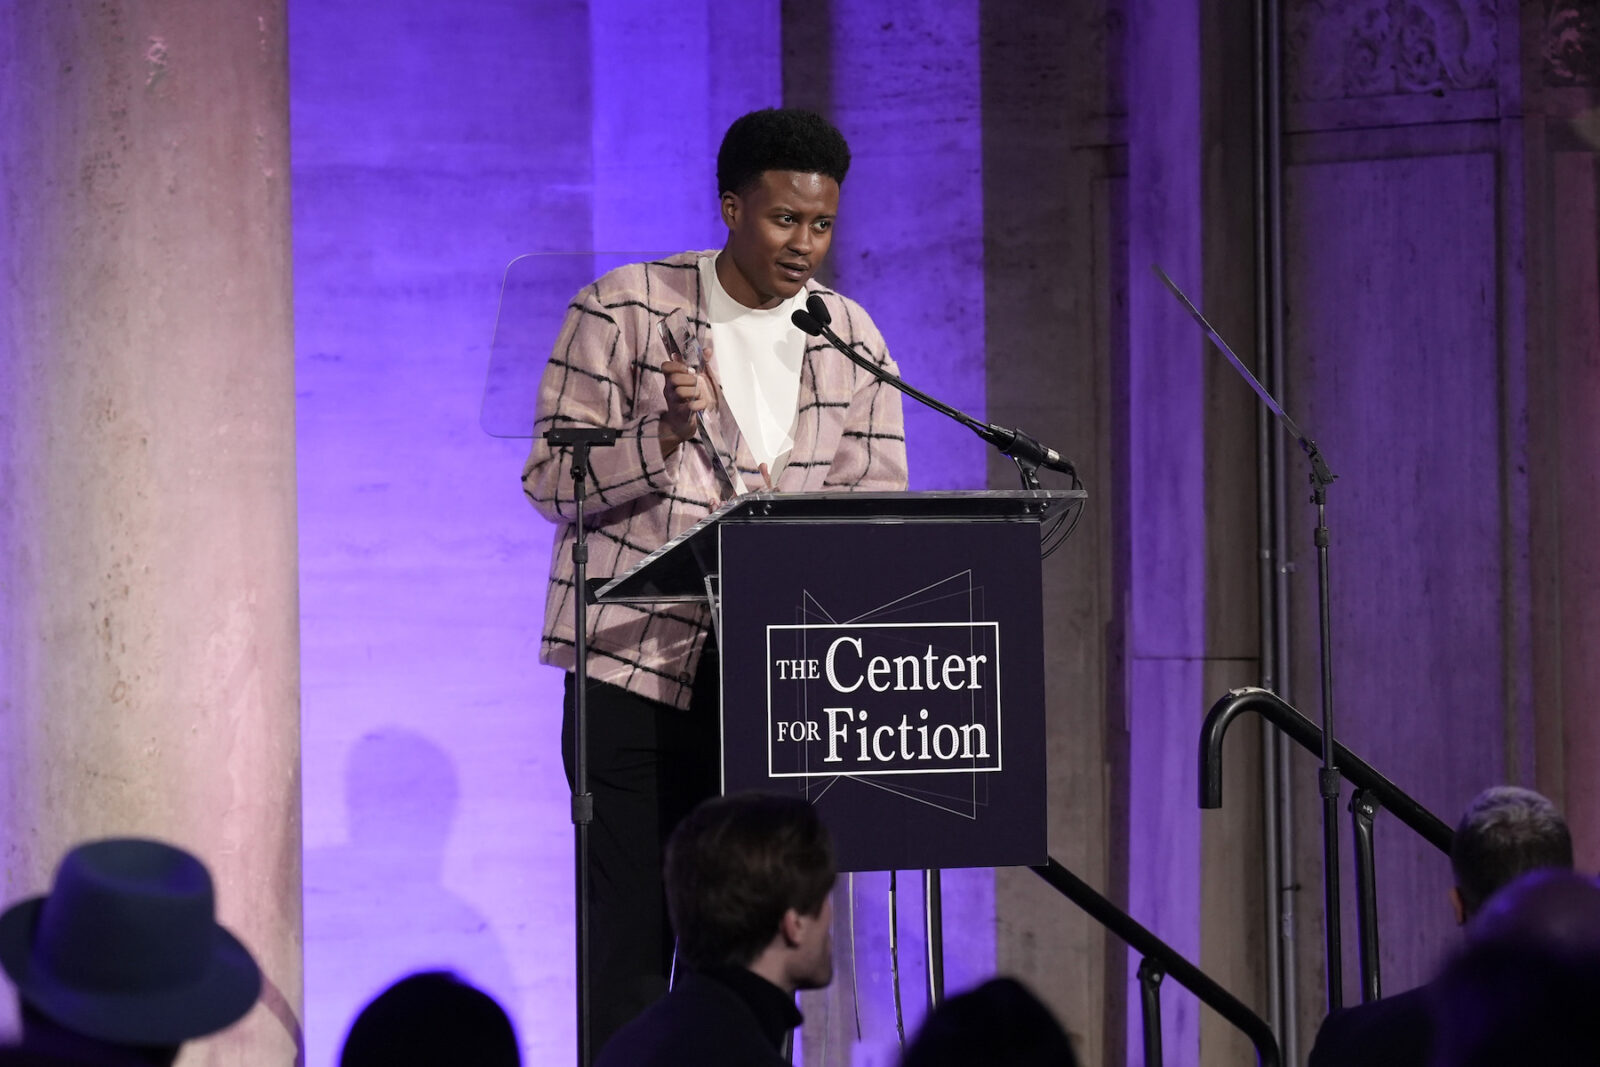 The Center For Fiction 2023 Annual Awards Benefit